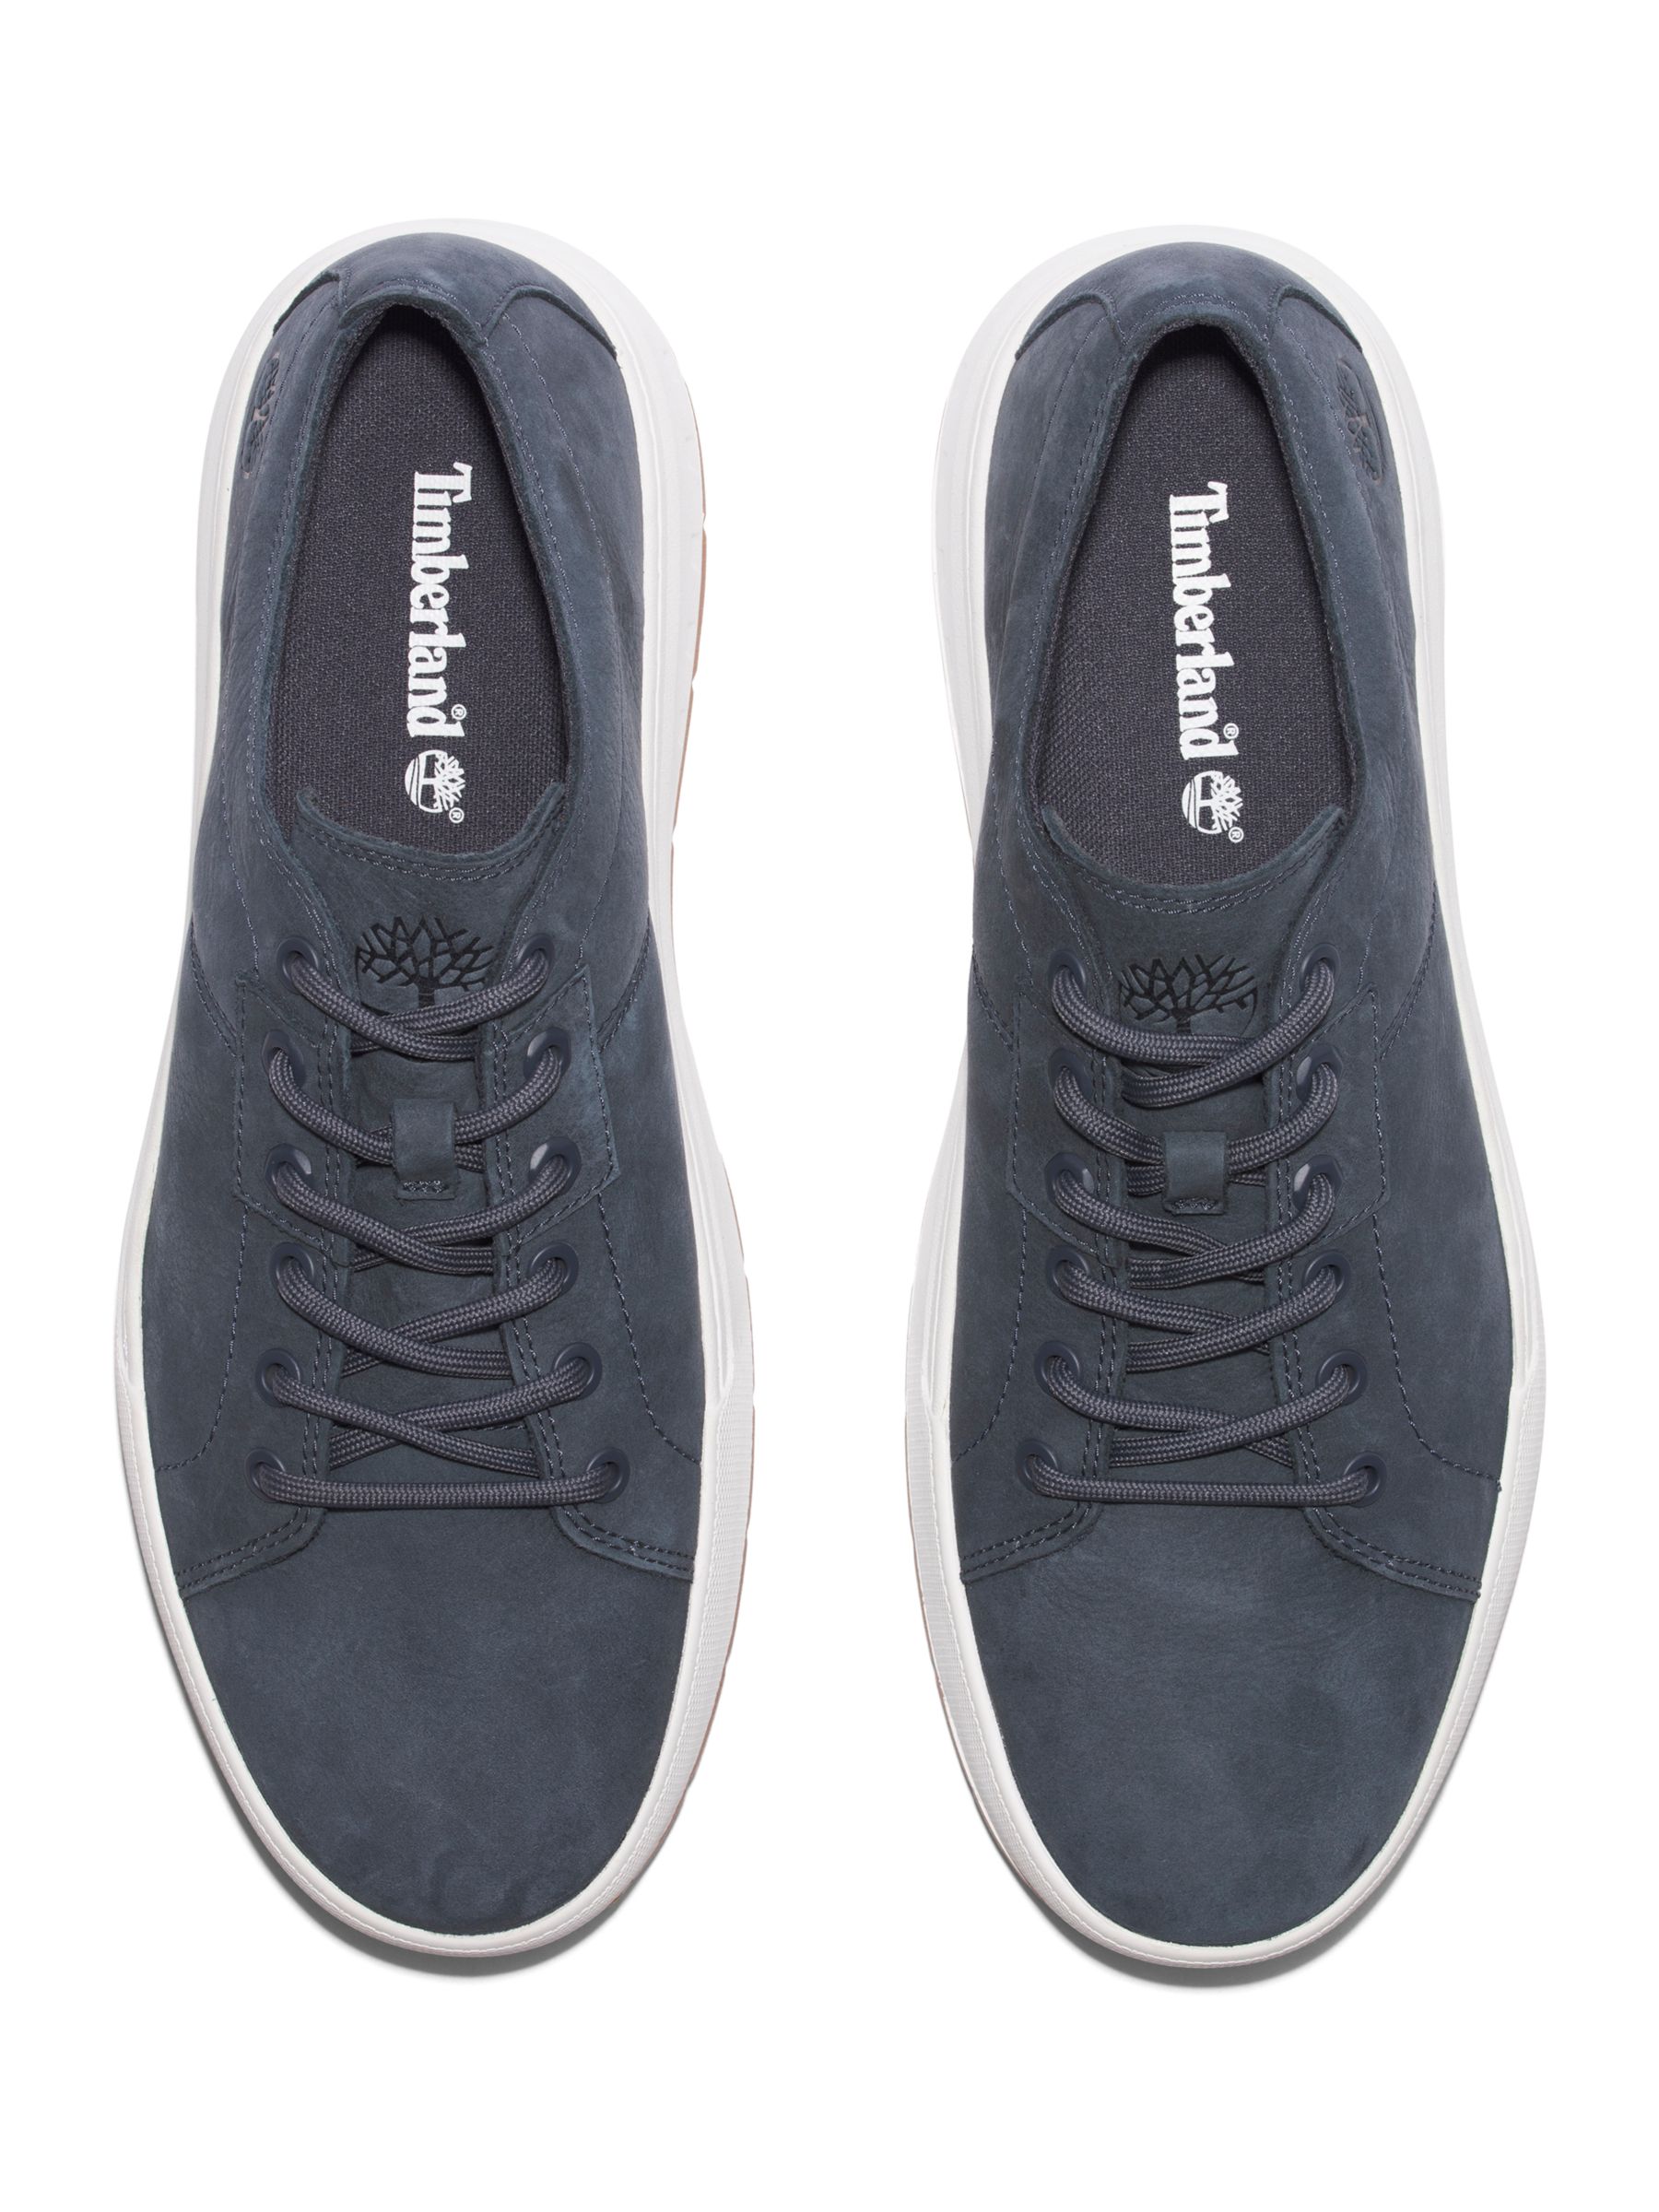 Buy Timberland Maple Grove Low Top Leather Trainers, Navy Online at johnlewis.com